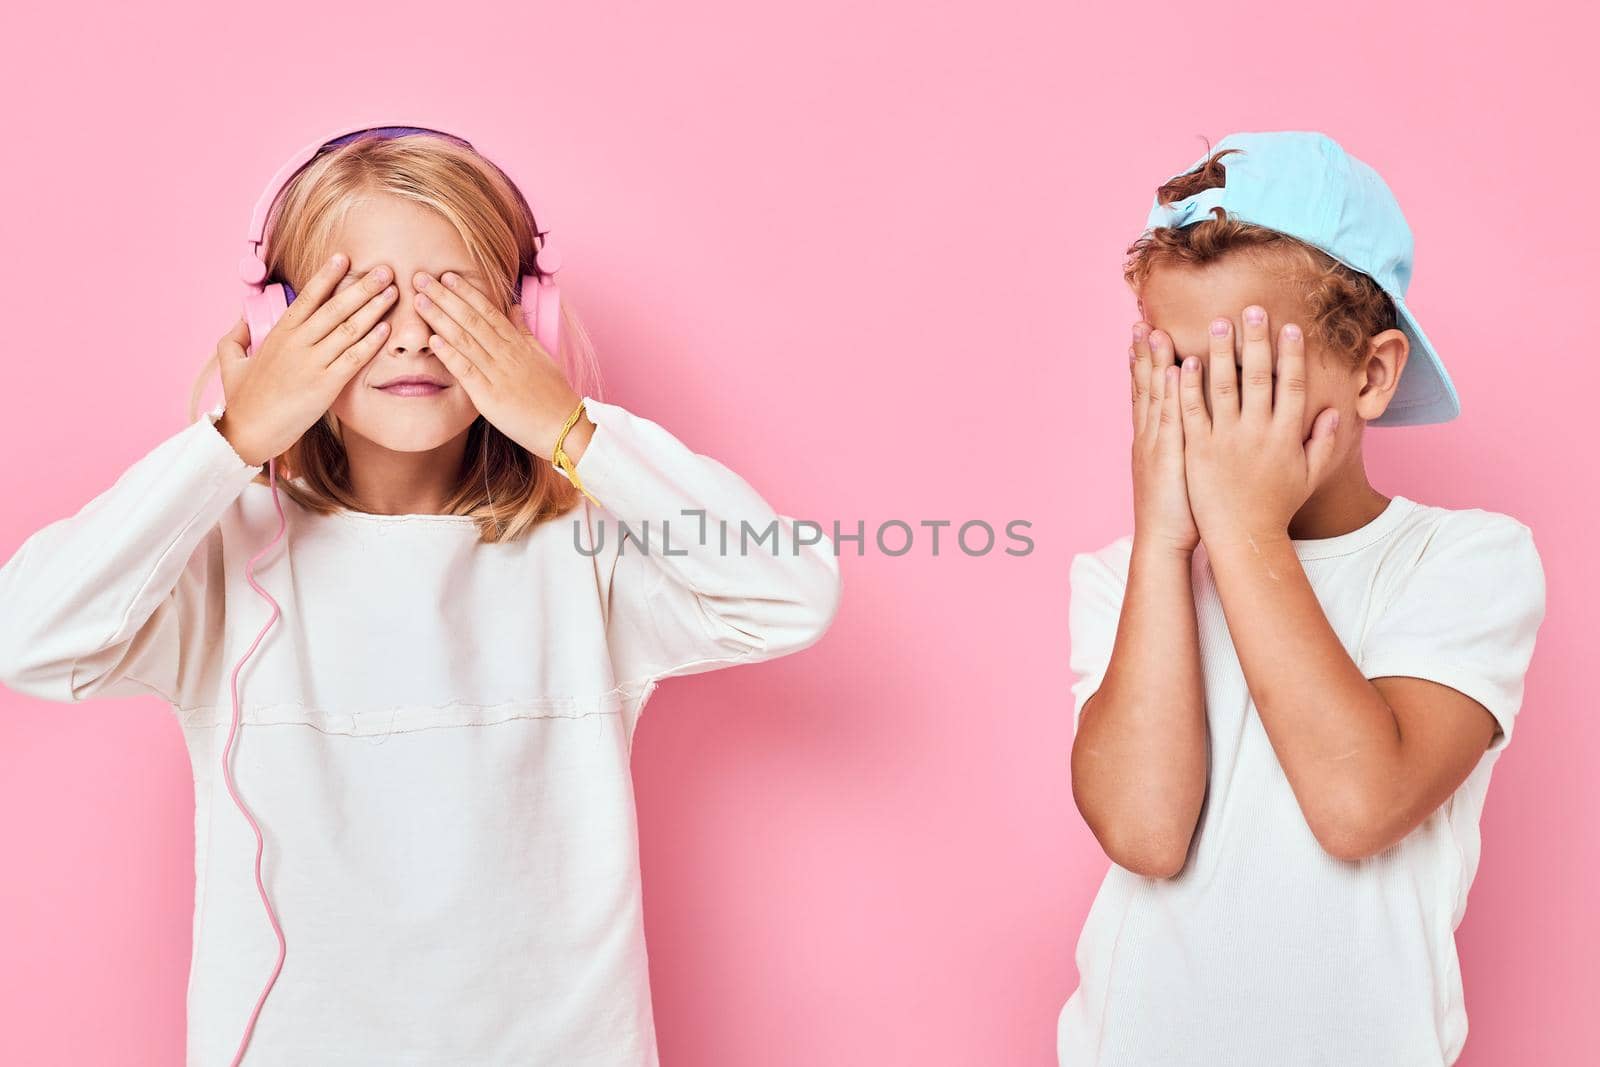 a boy in a cap and a girl standing side by side posing fashion isolated background by SHOTPRIME